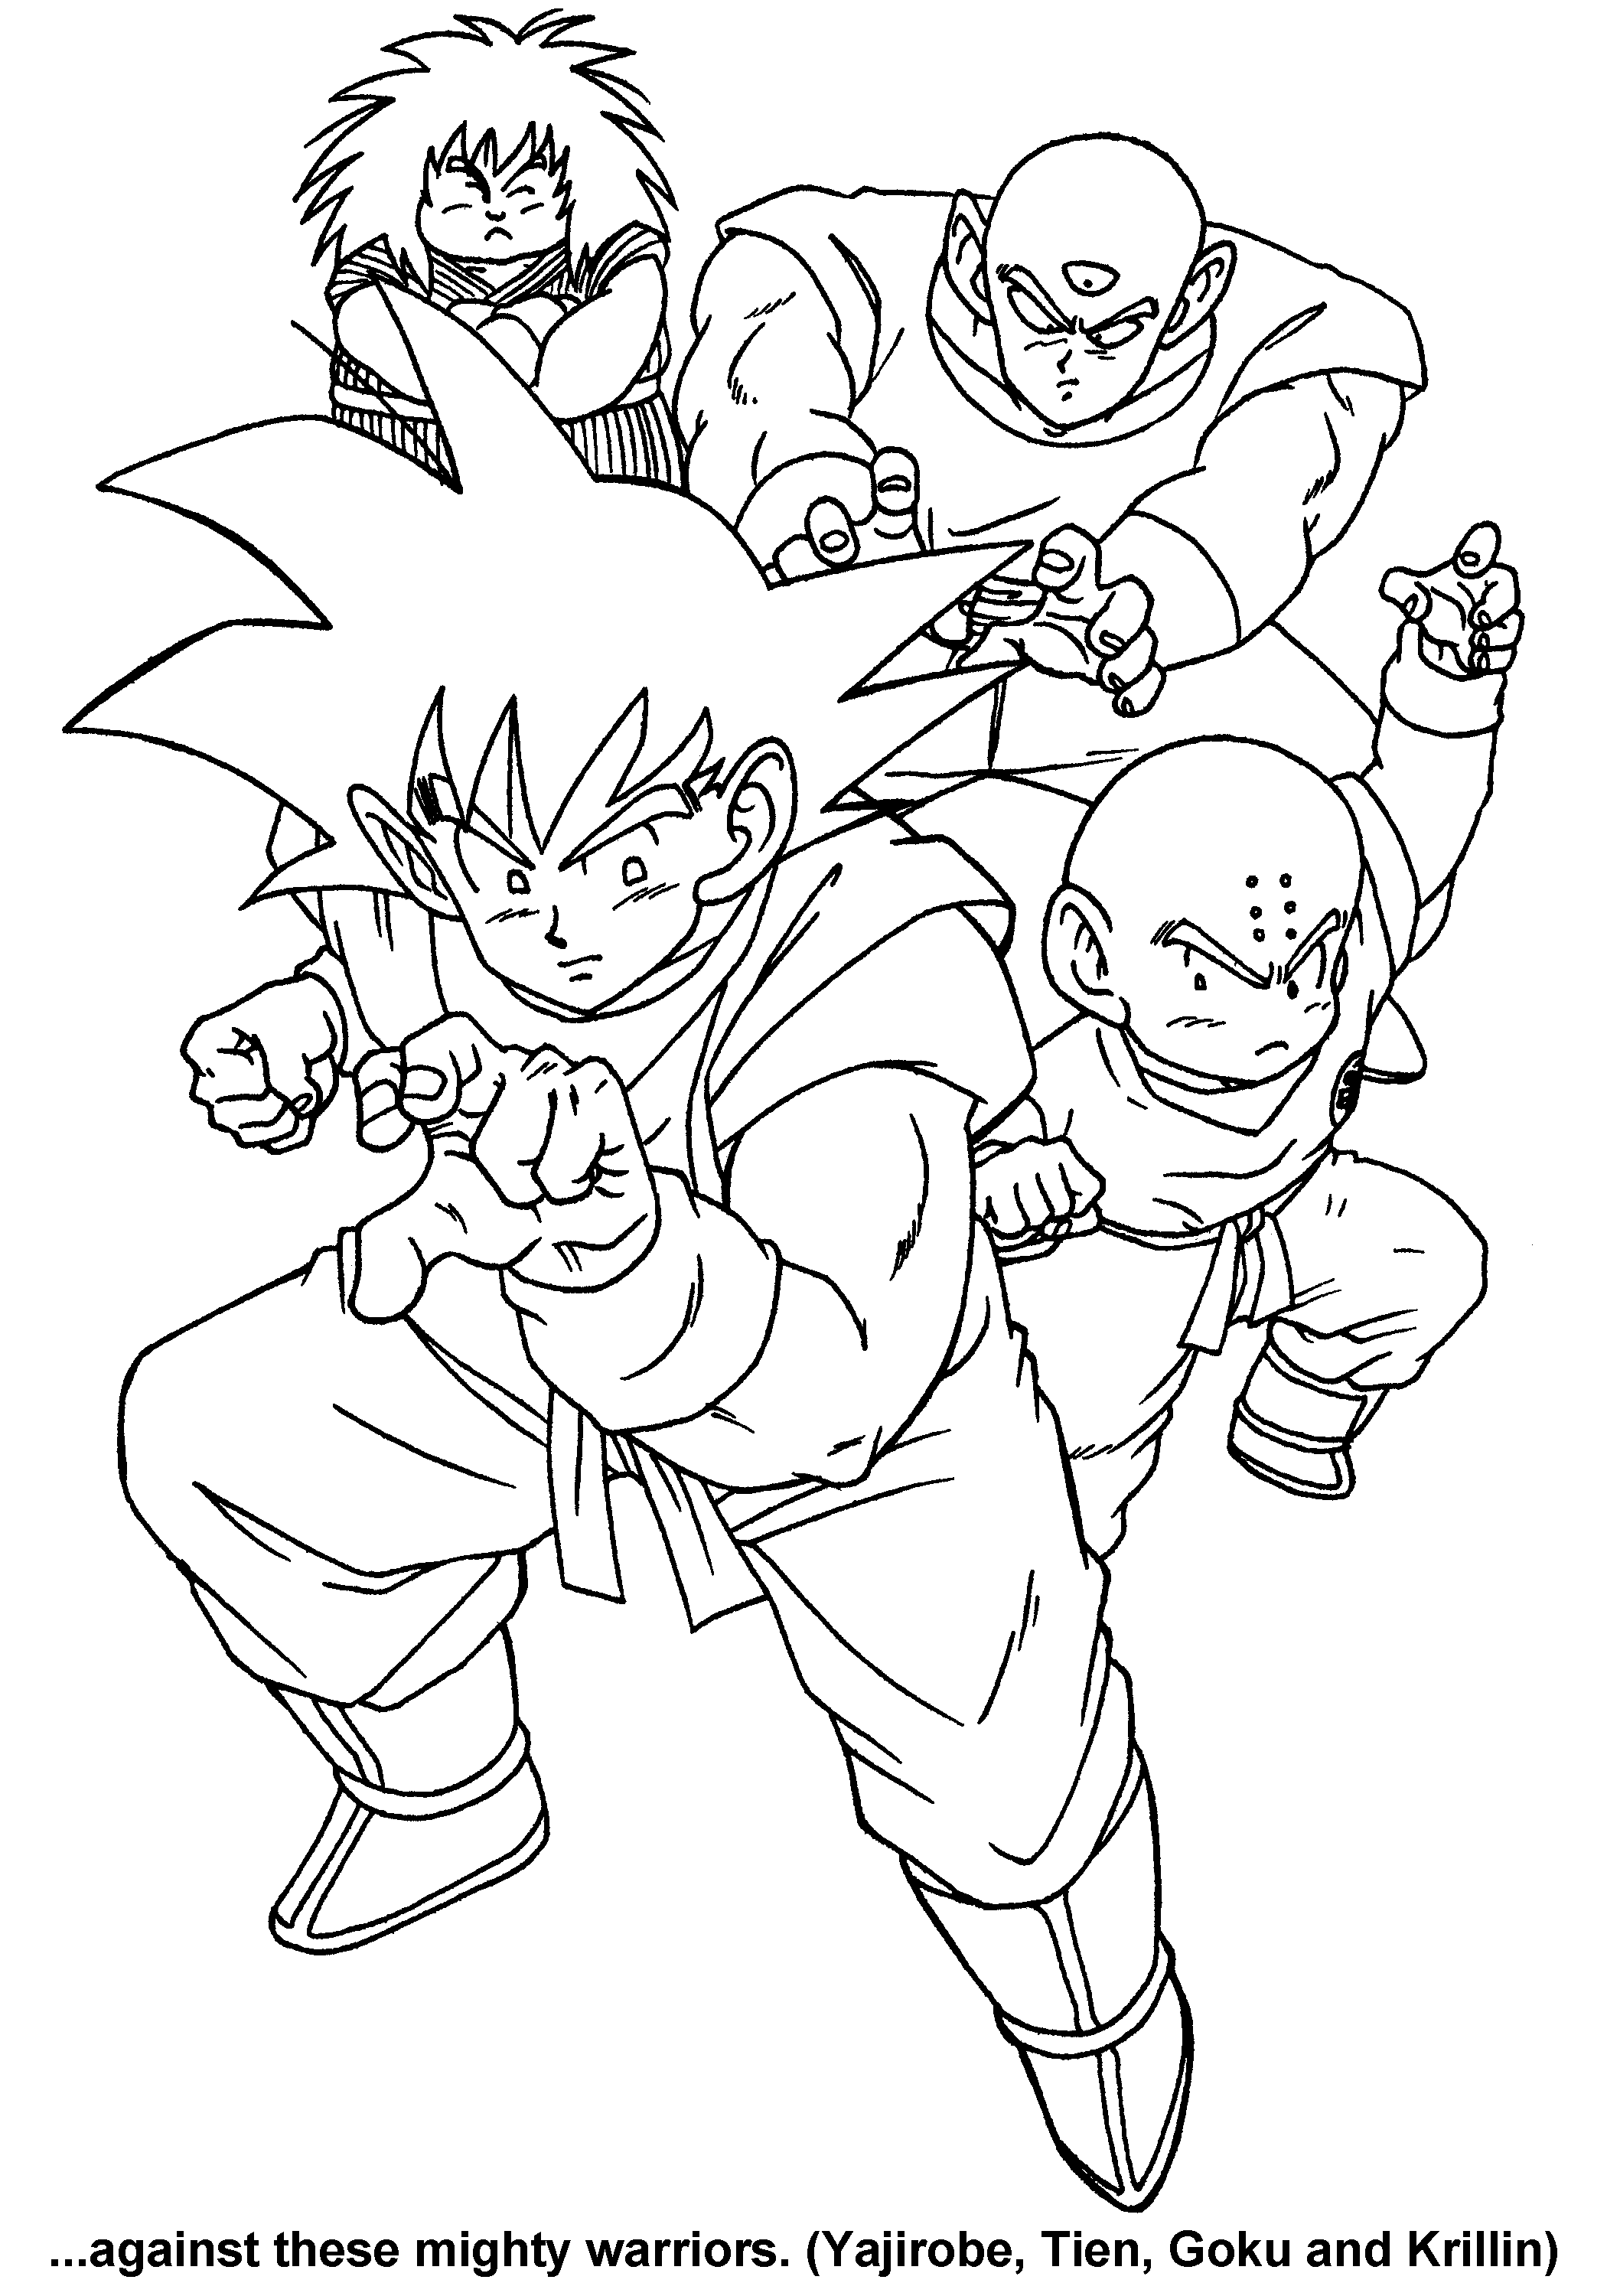 Coloring pages Â» Dragon ball z Coloring pages Cartoons